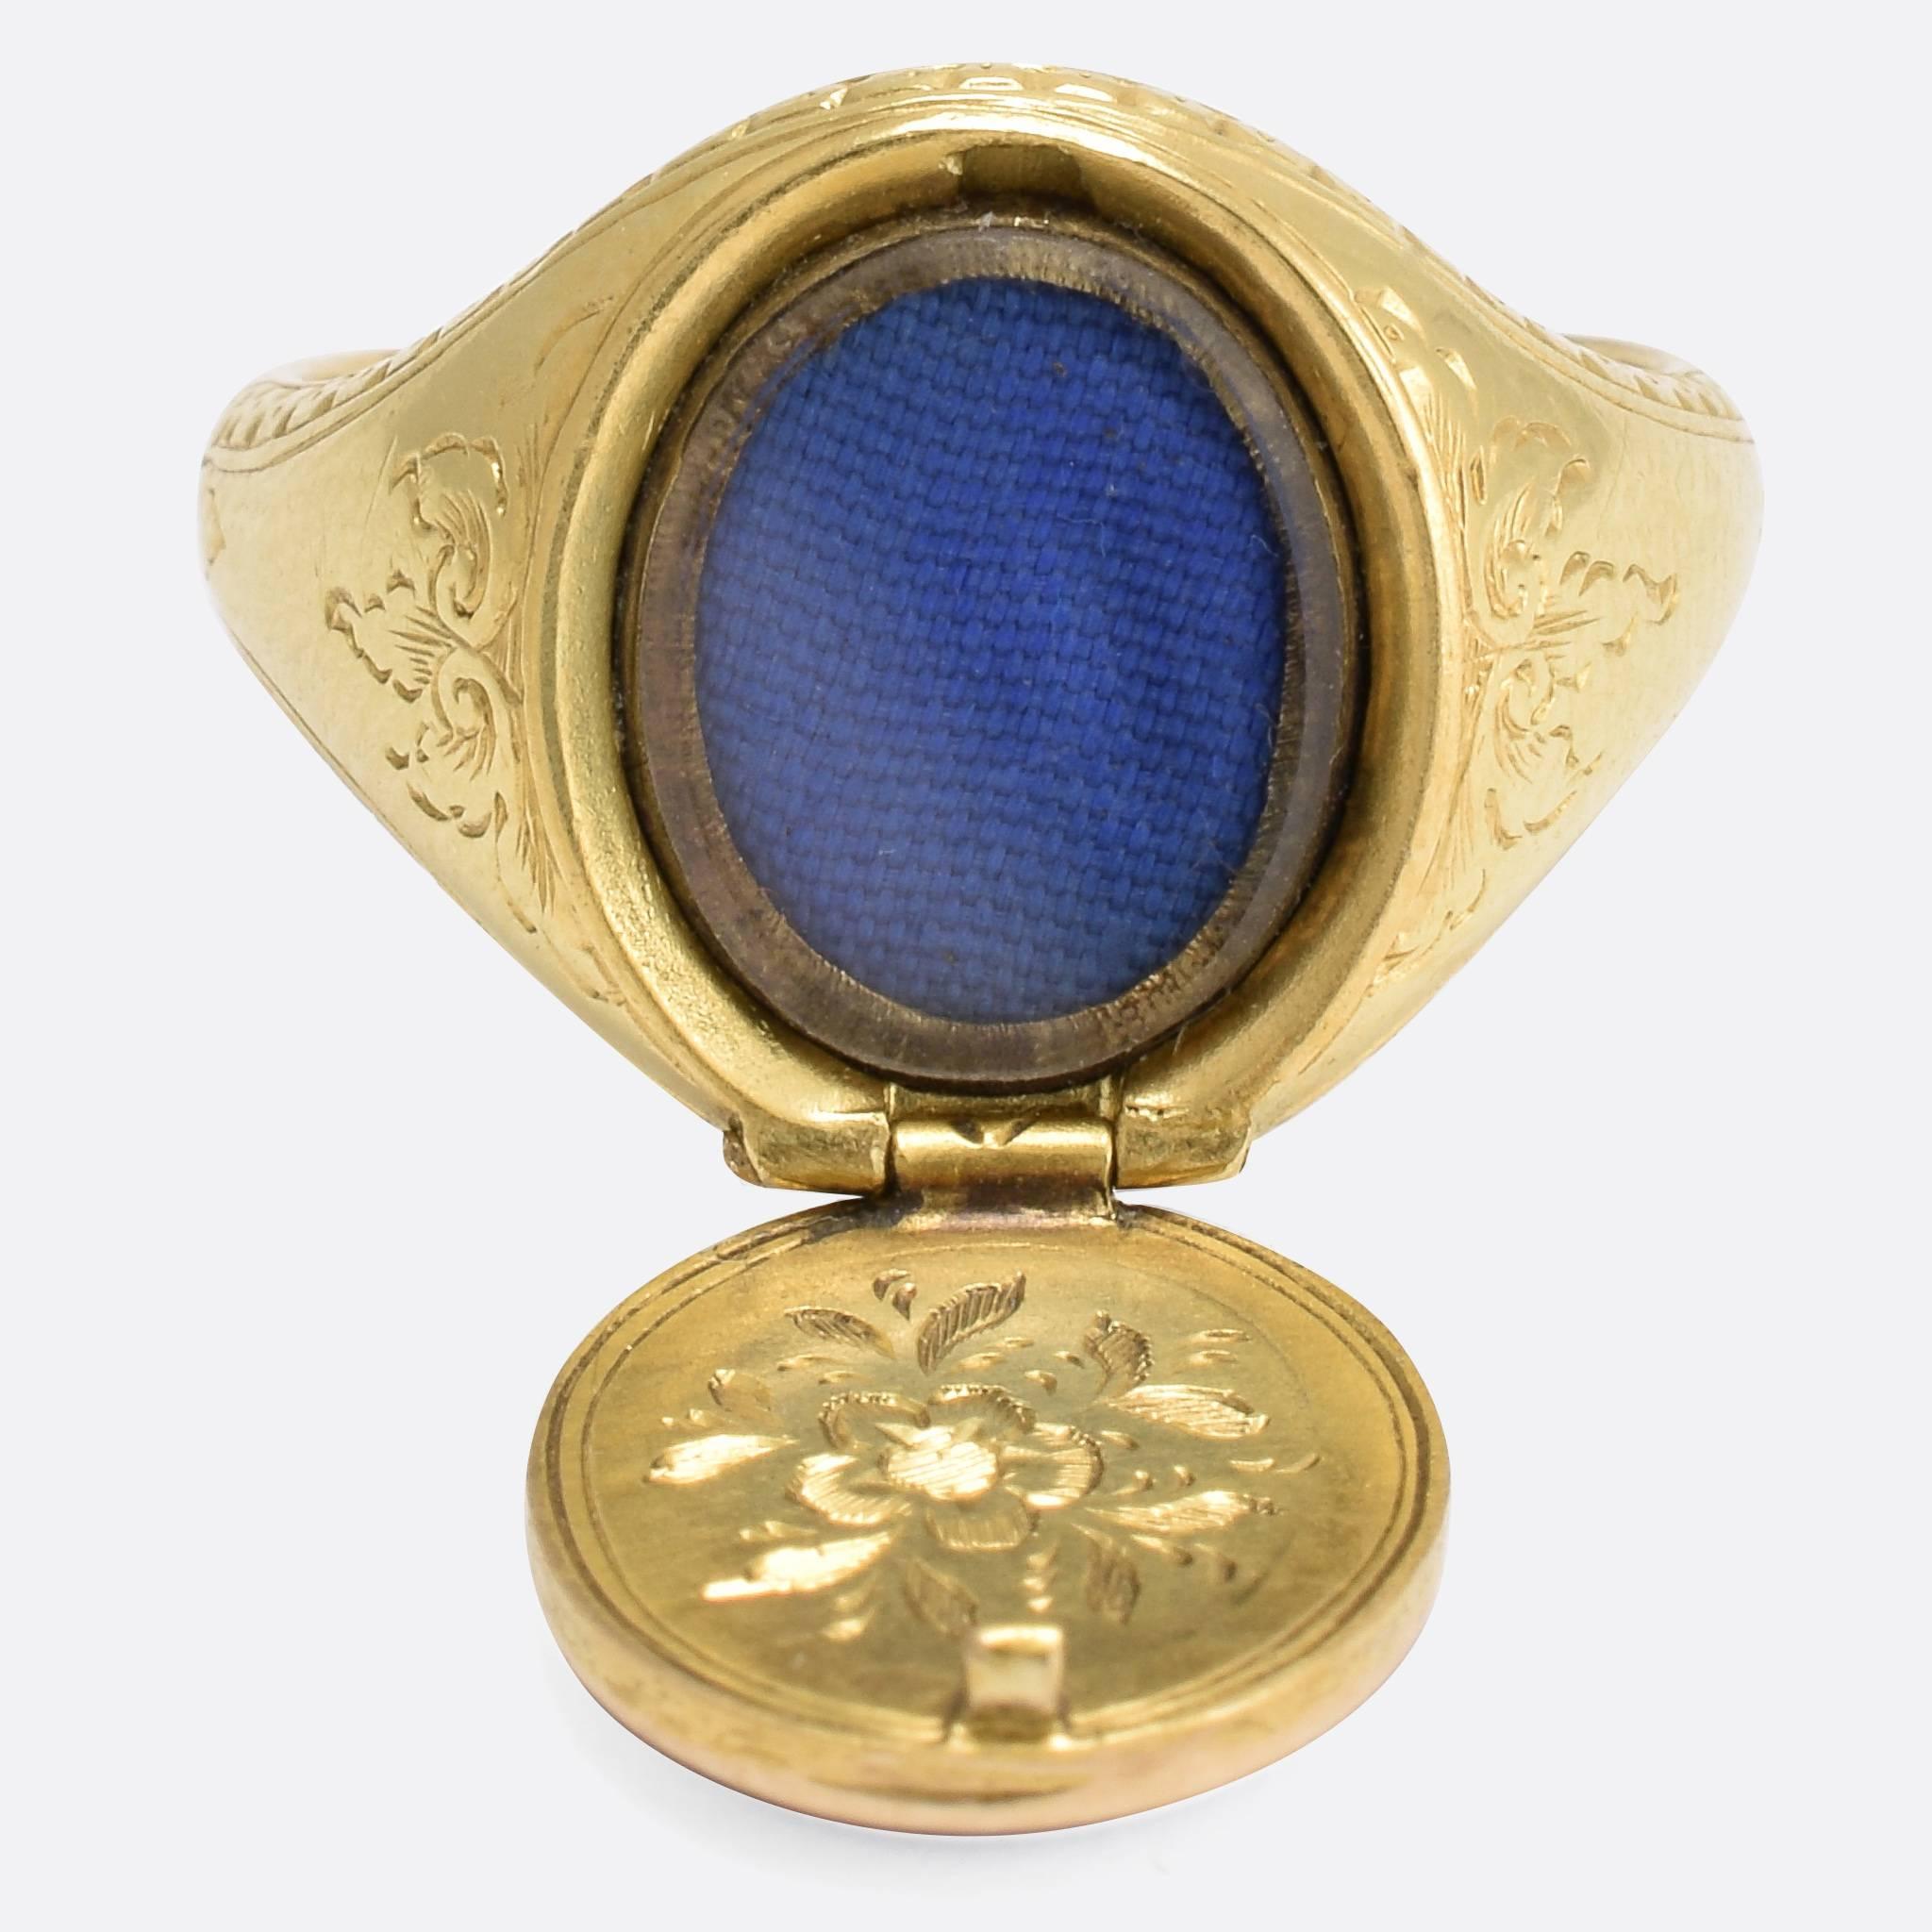 This incredible signet ring would be beautiful enough, even if it wasn't for the hidden locket compartment... The Sardonyx panel is hinged, and opens up to reveal a glass-fronted locket compartment, with wonderful chased detail inside the lid. The